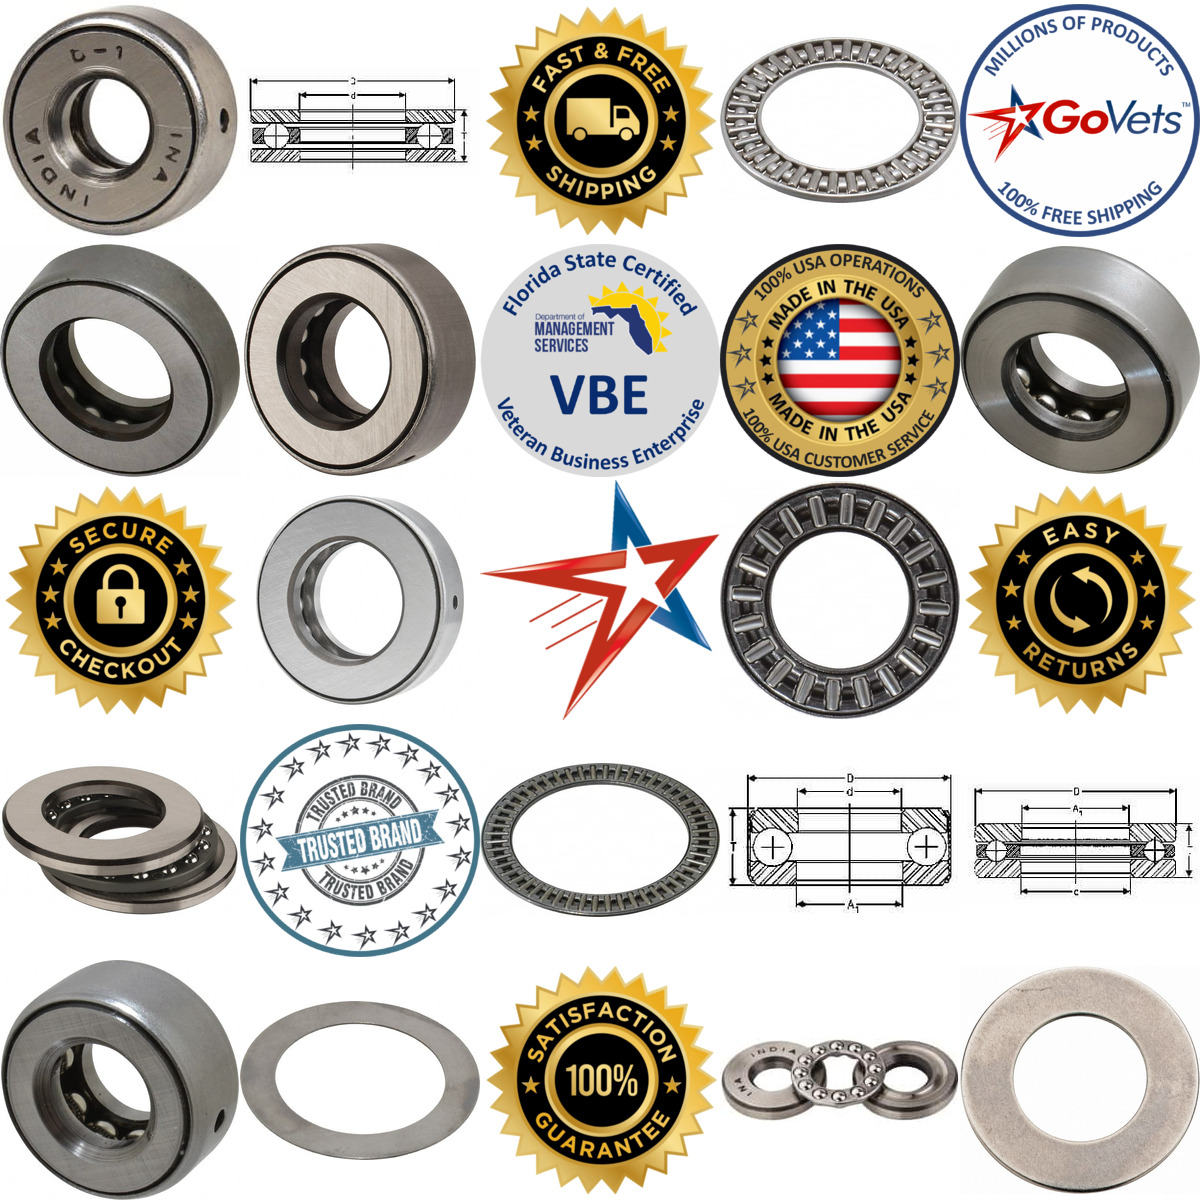 A selection of Ina Bearing products on GoVets